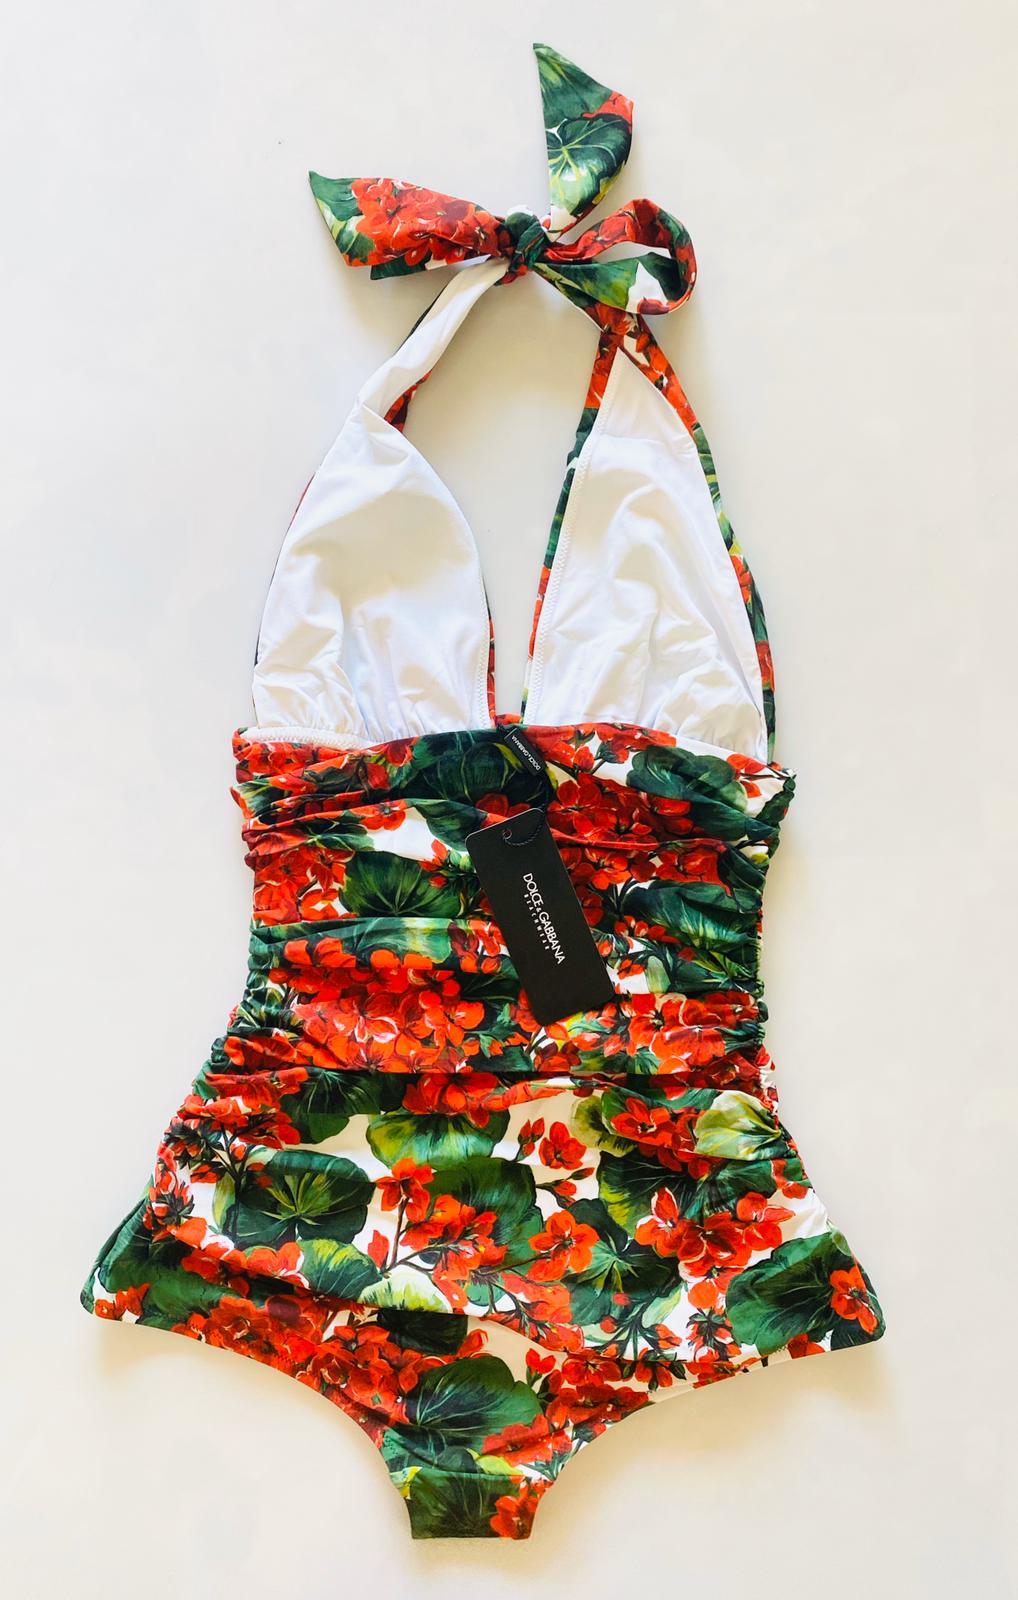 Stunning Dolce & Gabbana one-piece swimsuit which is draped on the sides is made from a precious fabric in the romantic GERANIUM print and has an extraordinarily sophisticated look. 
Perfect for both the poolside and as a top for a cocktail party.